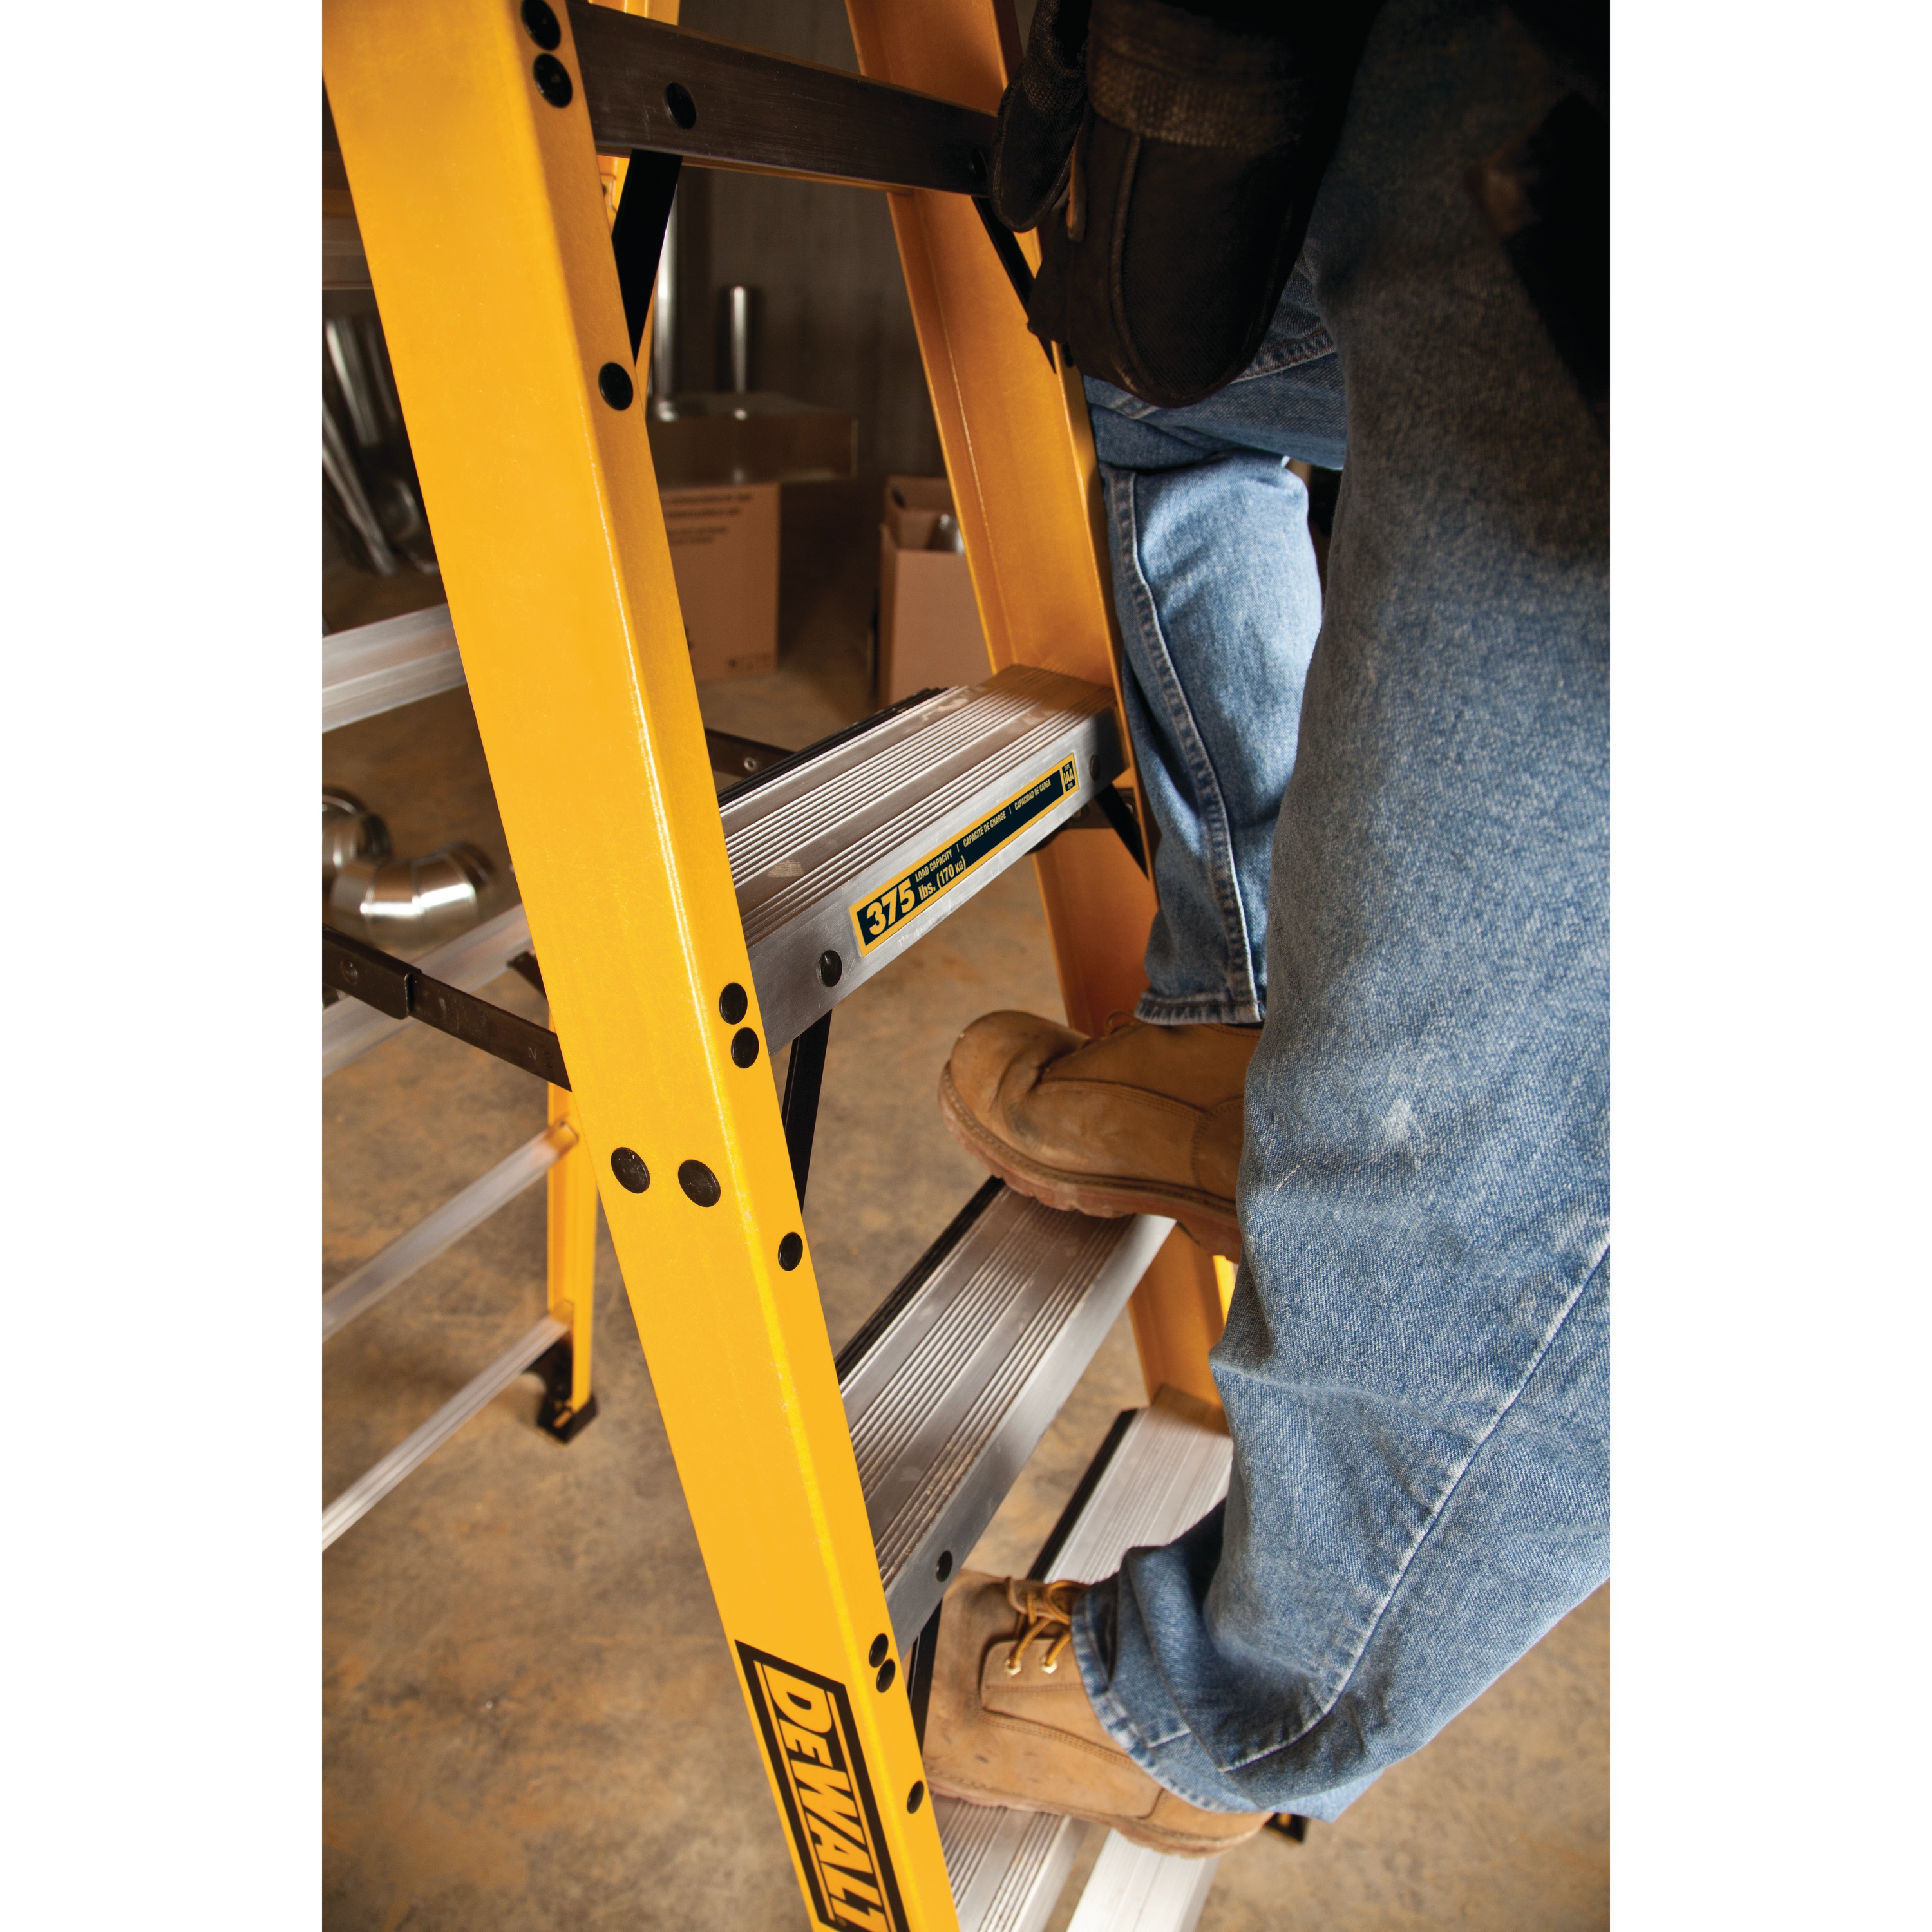 Greater step surface 10 foot Fiberglass Step Ladder 375 pound Load Capacity.